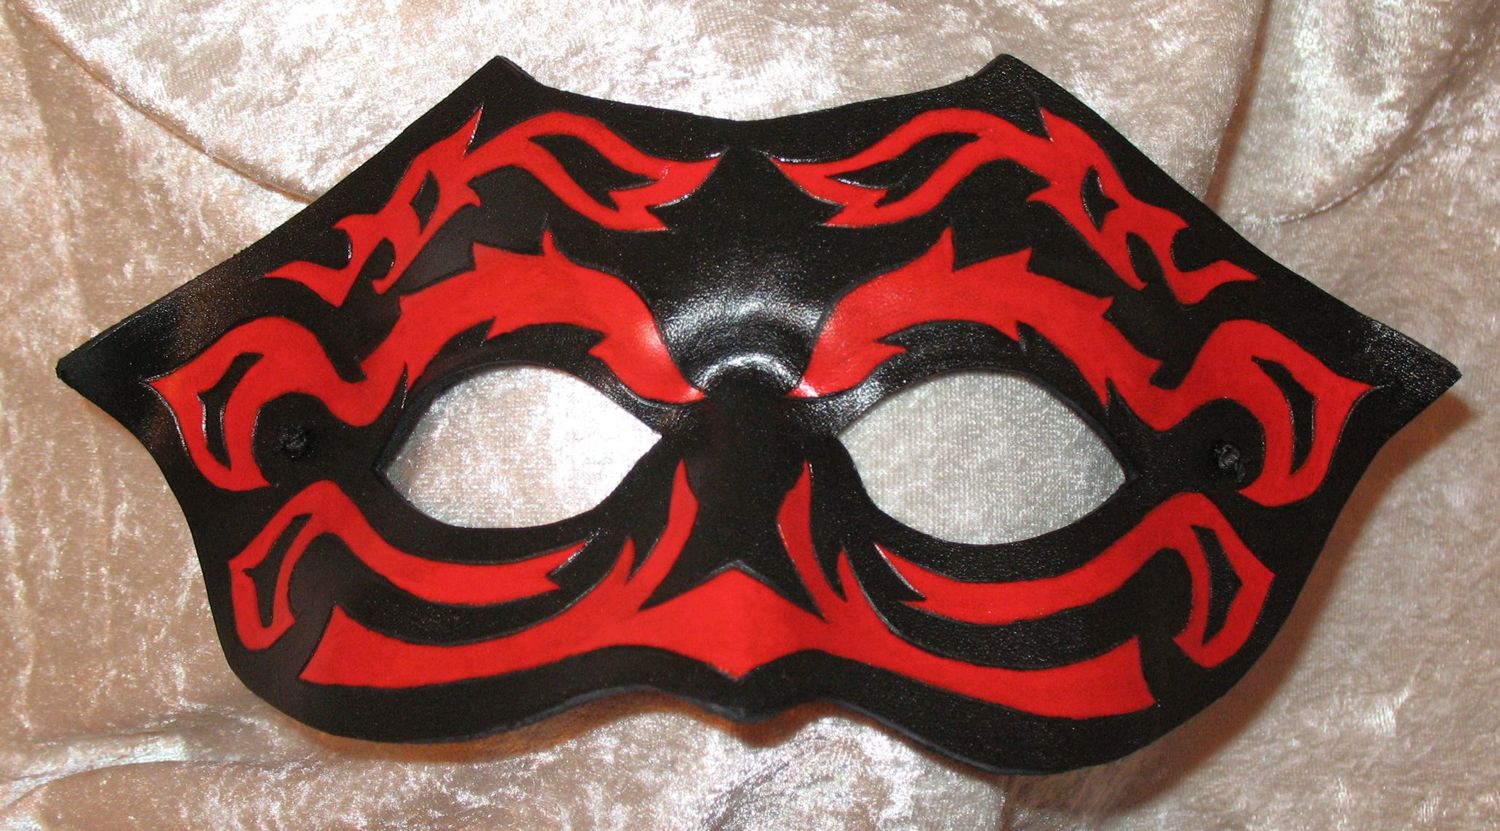 Black & red Cain mask.